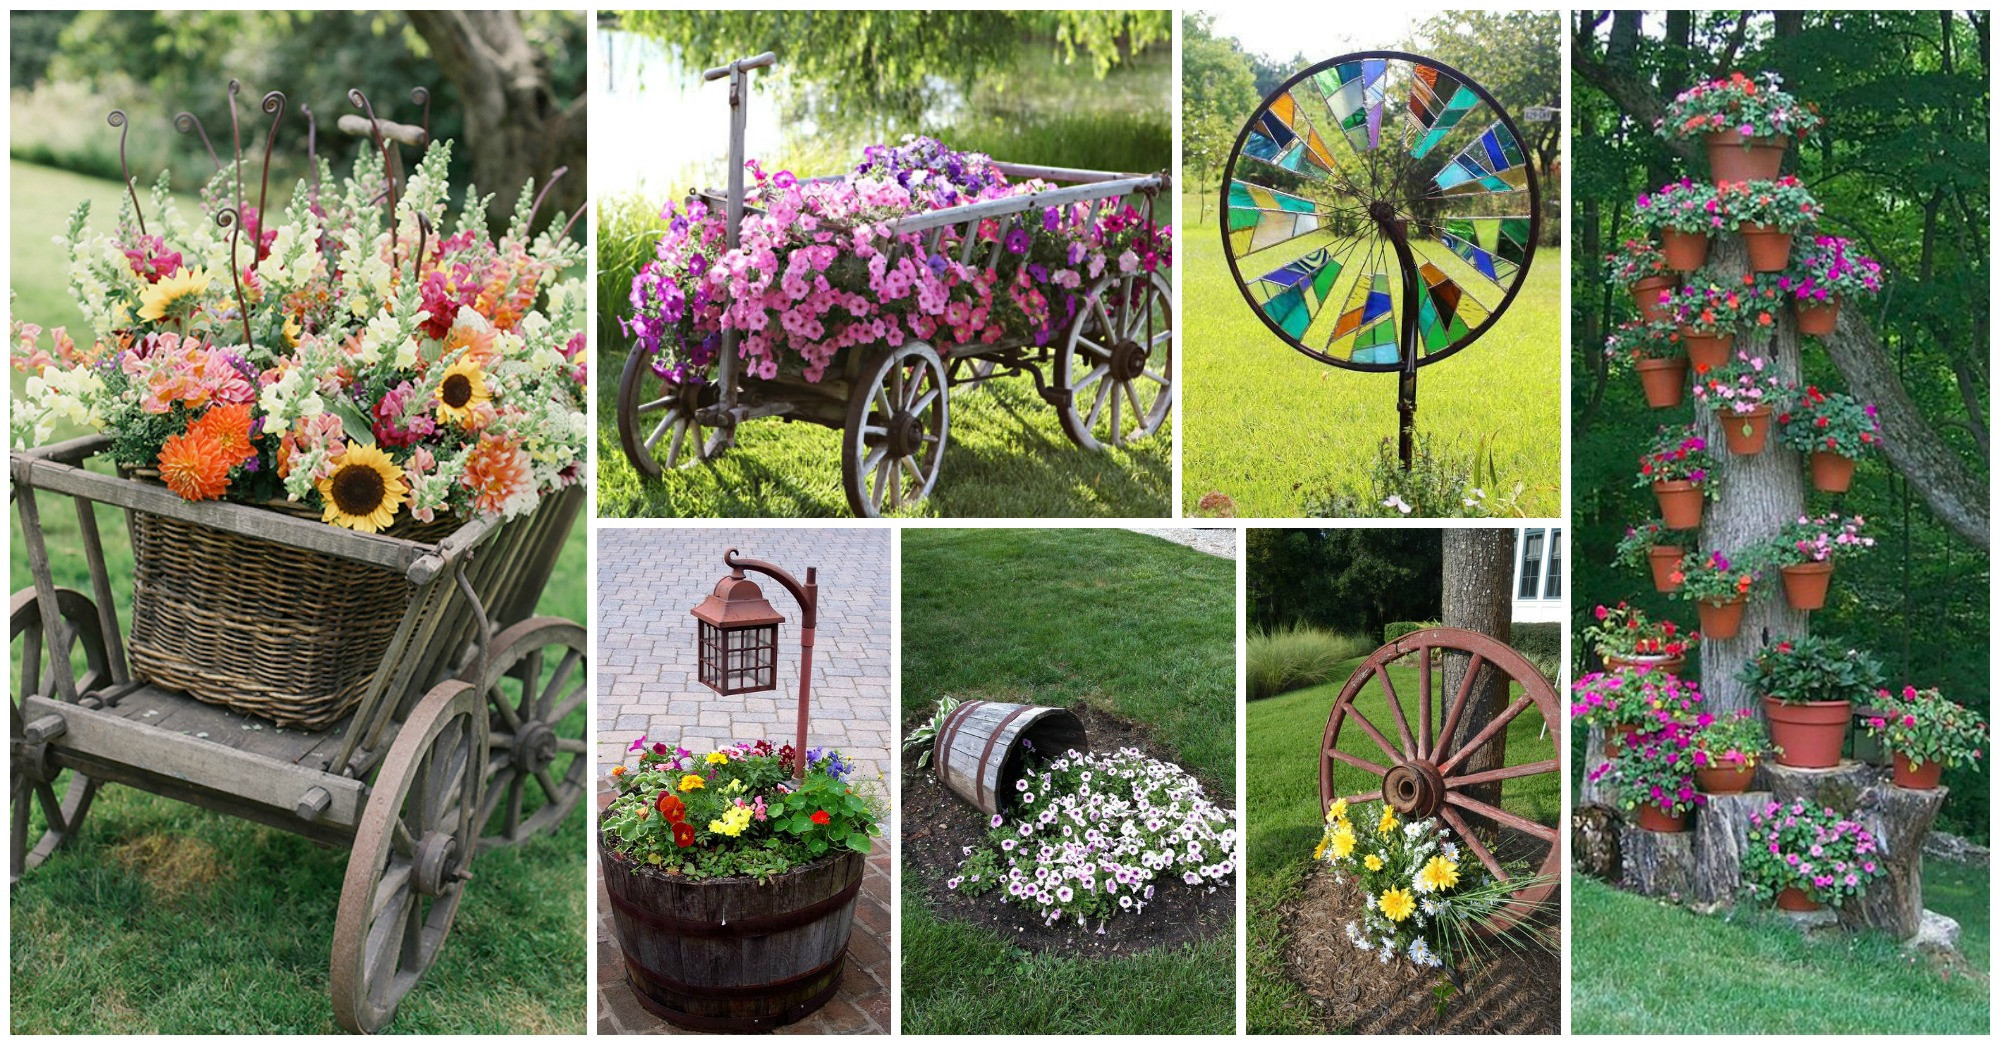 DIY Outdoor Decor
 20 Amazing DIY Projects To Enhance Your Yard Without